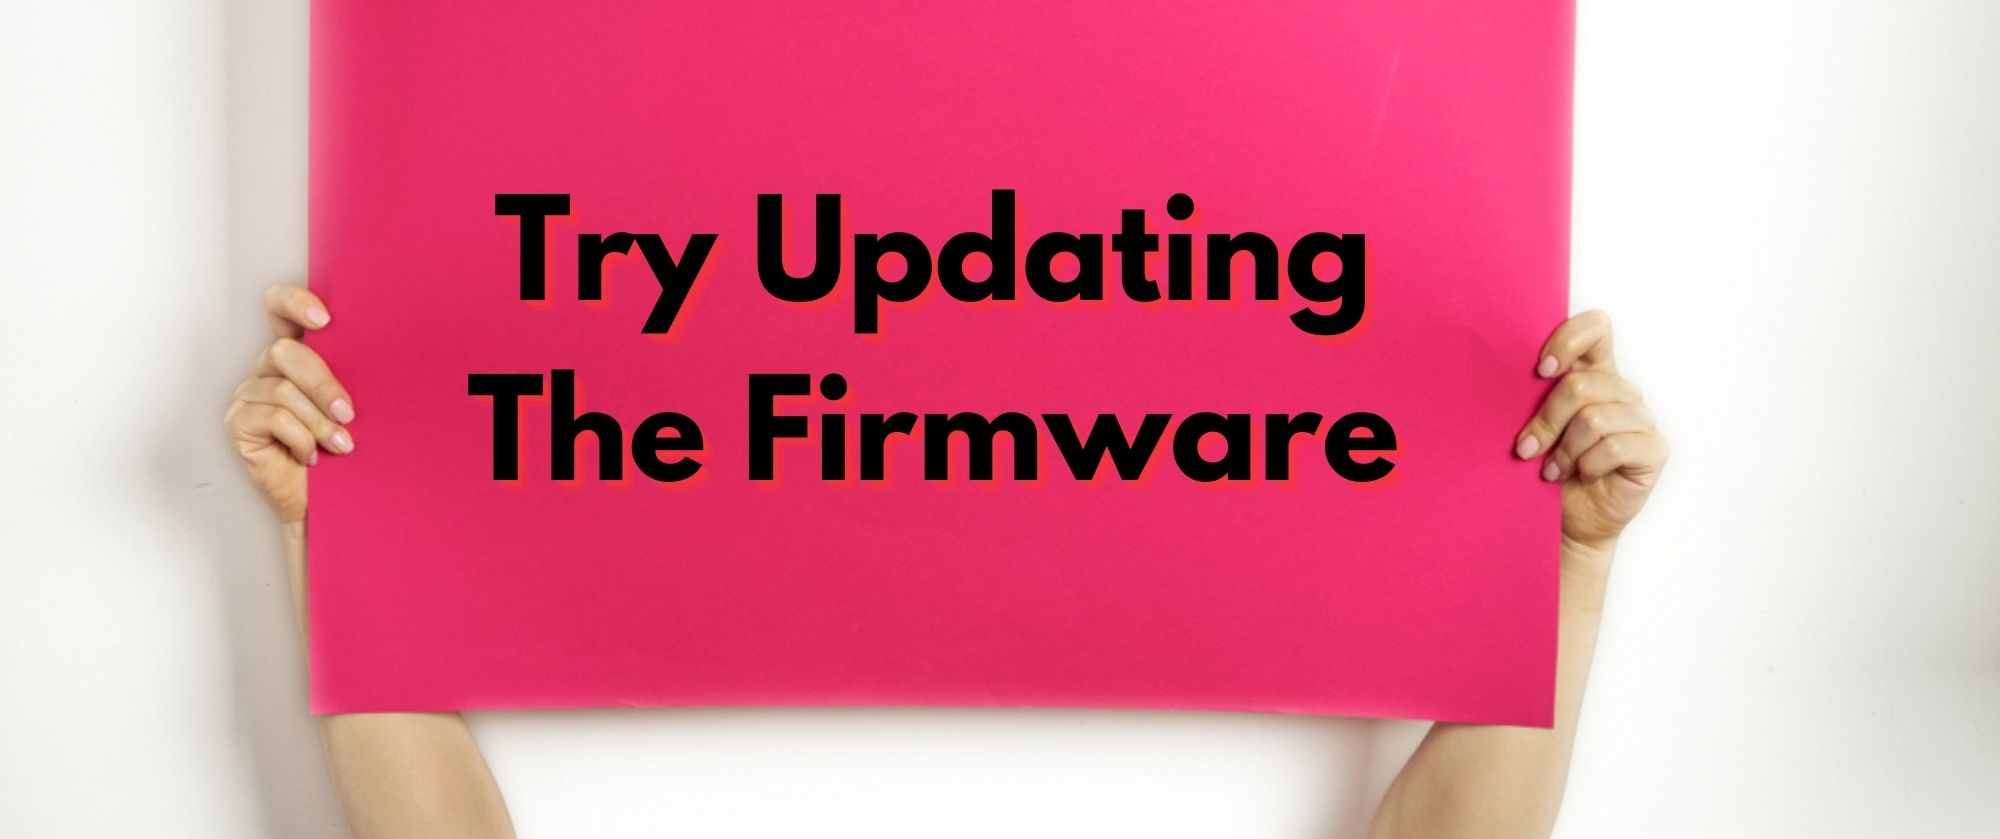 Try Updating The Firmware